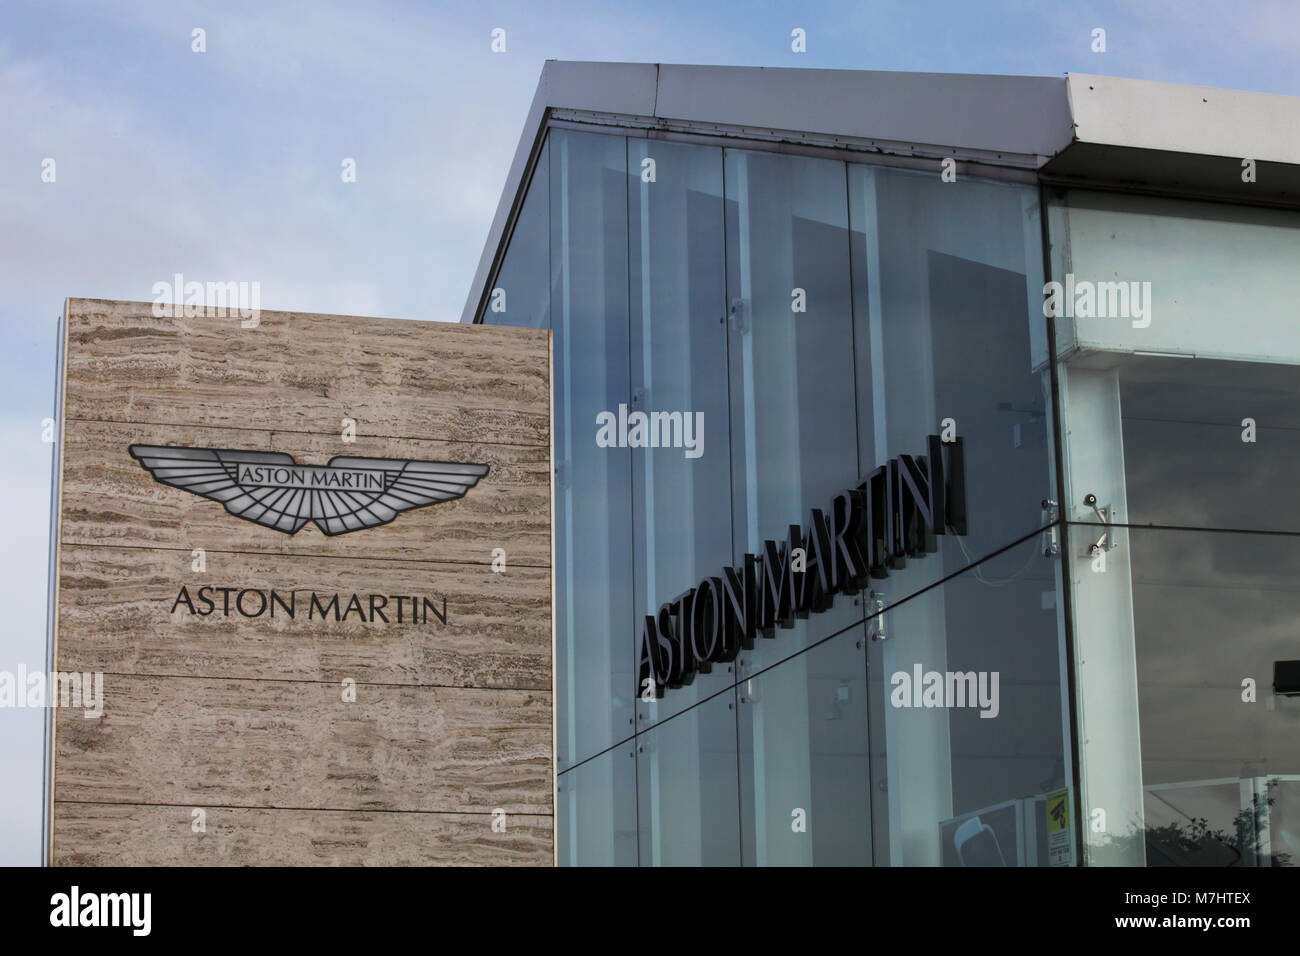 The Aston Martin logo and name on the sign outside the showroom selling the marque in Edinburgh Stock Photo